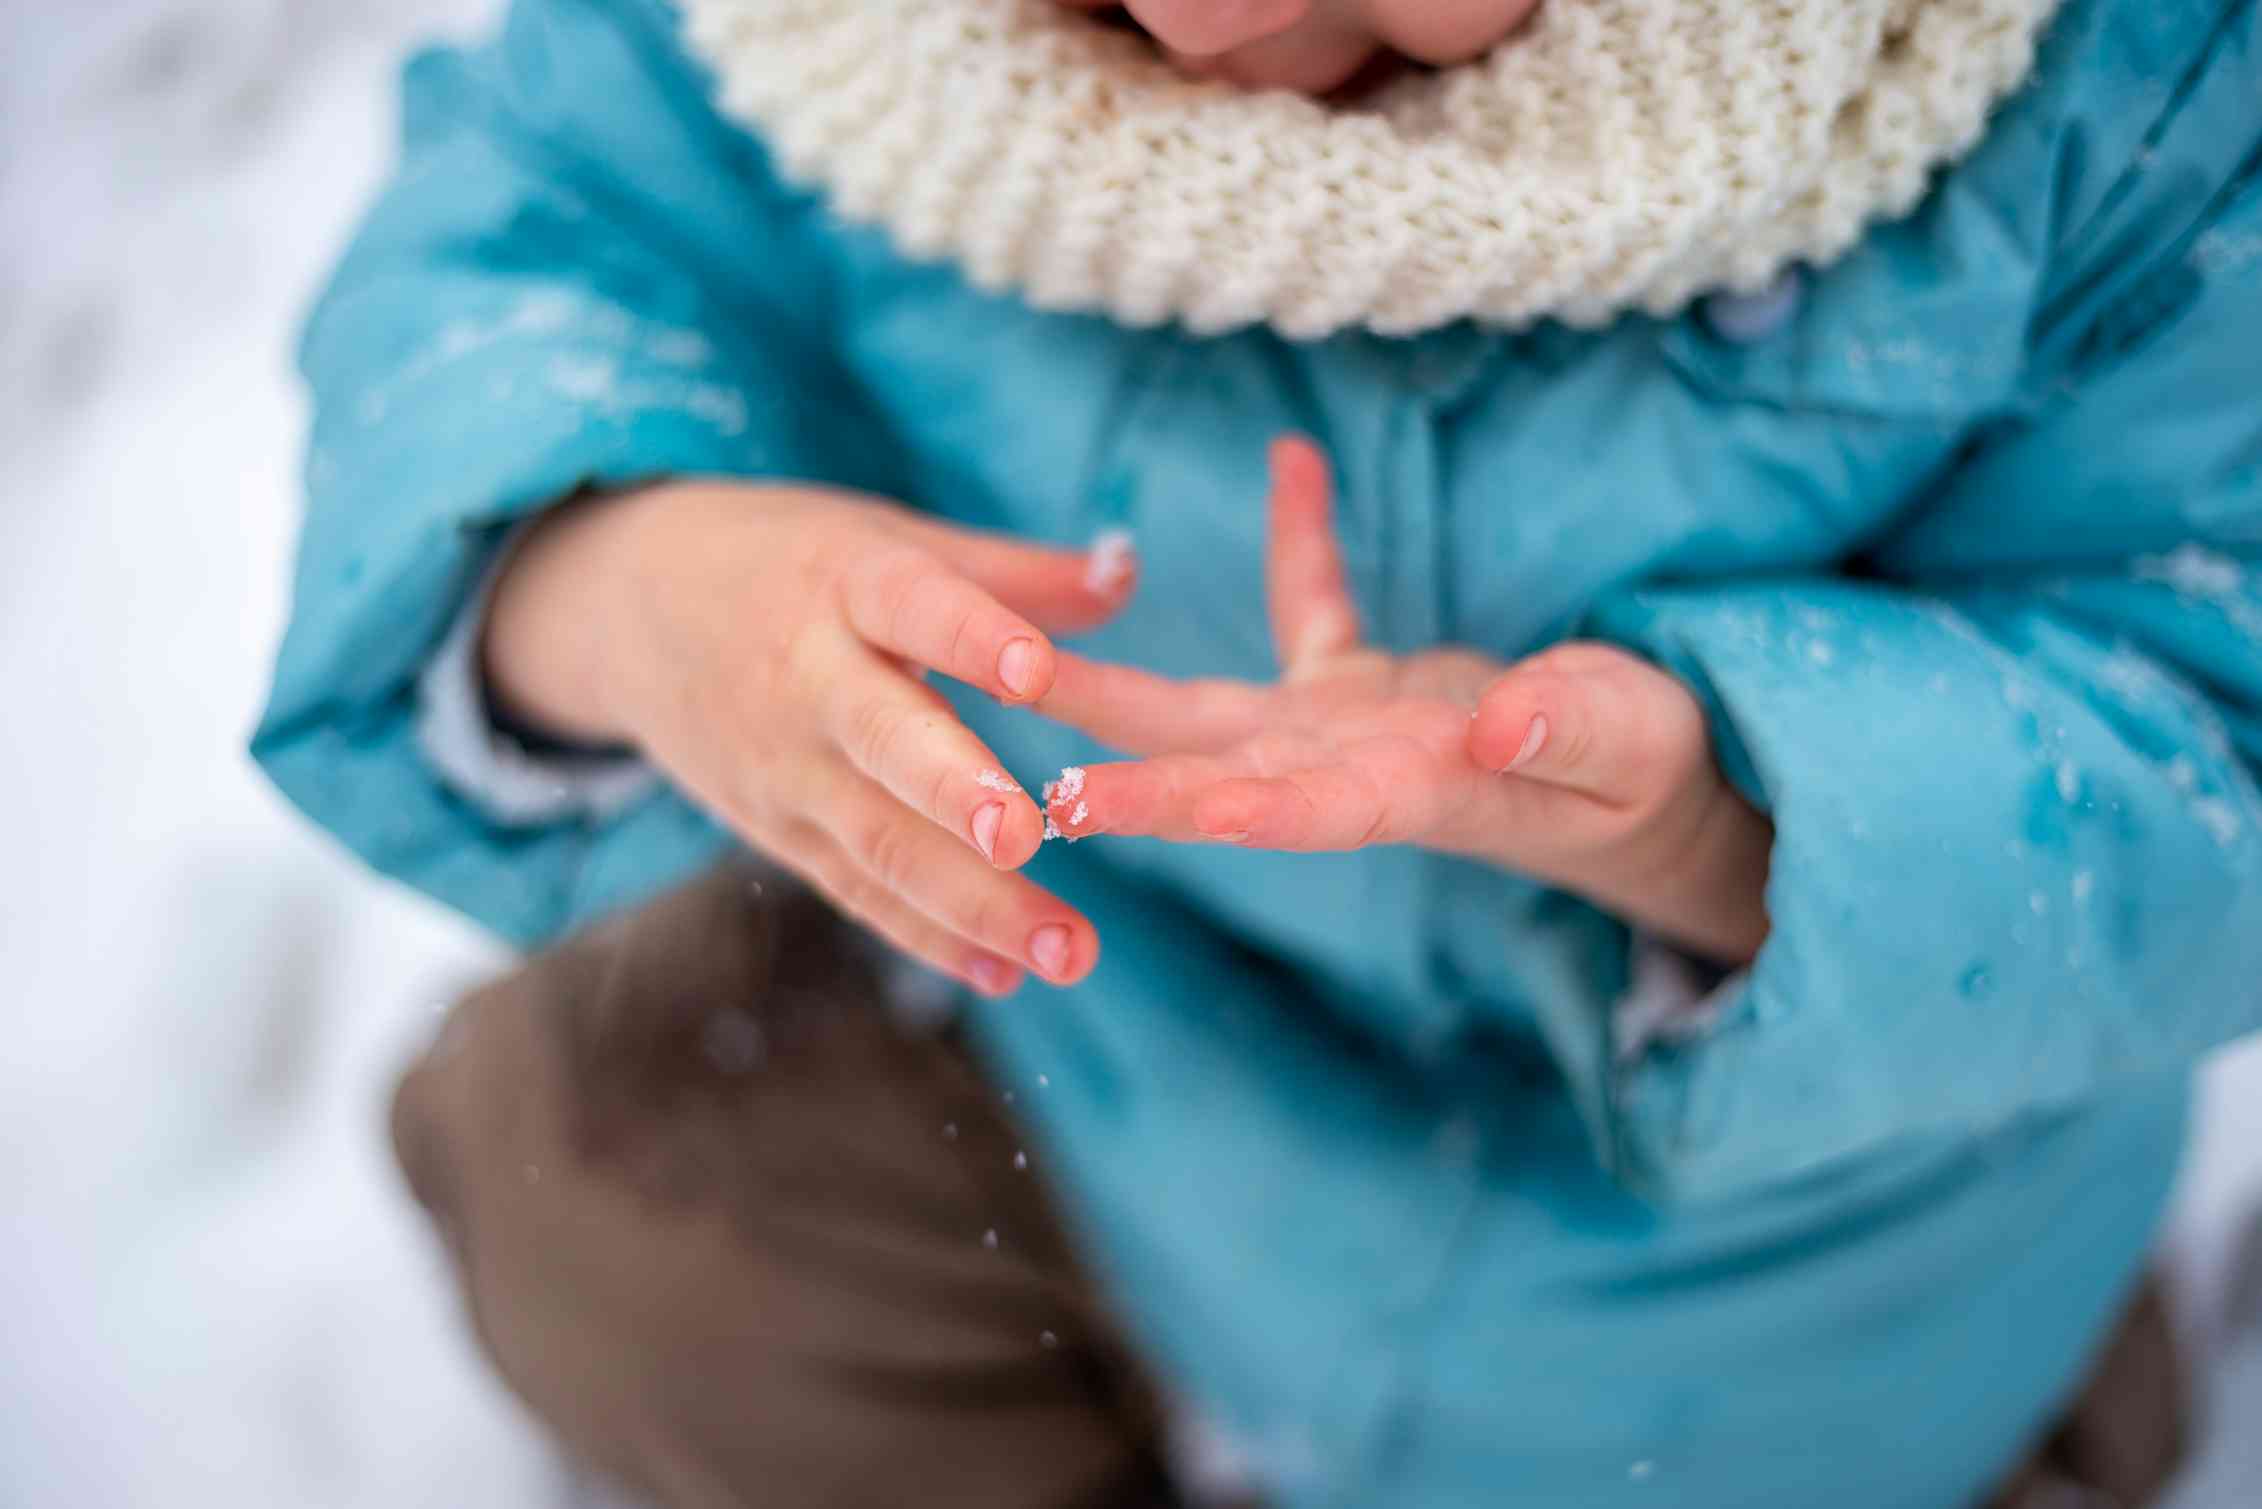 a young child with bare hands and reddened fingertips in the snow